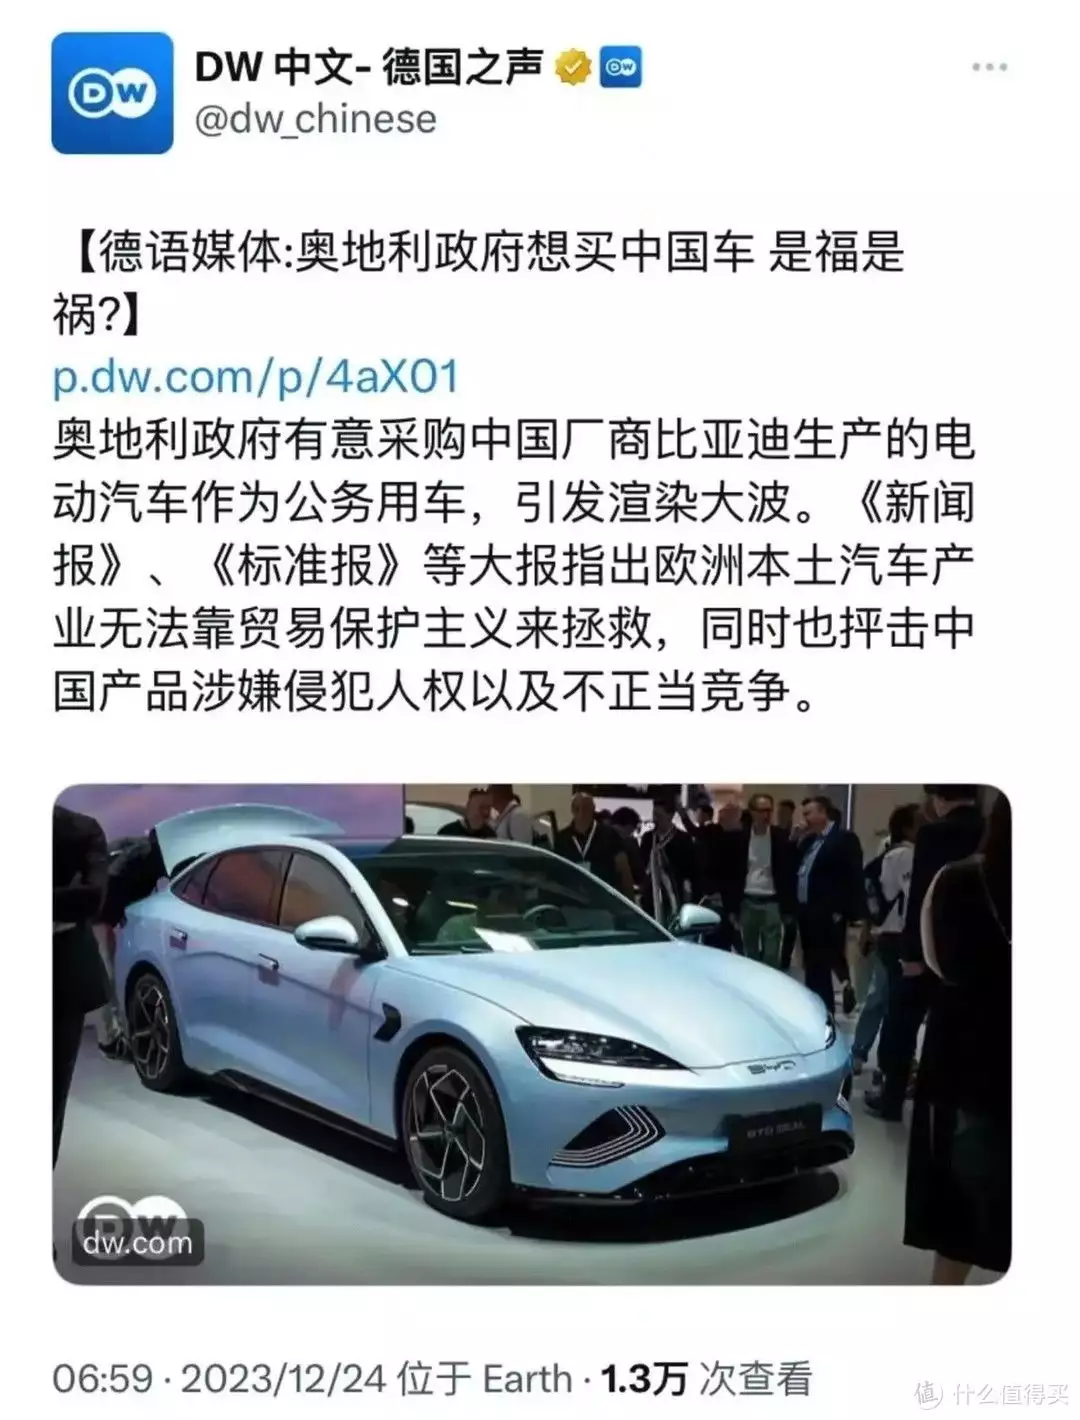 The Austrian government wants to buy Chinese cars, which has caused criticism in Germany.